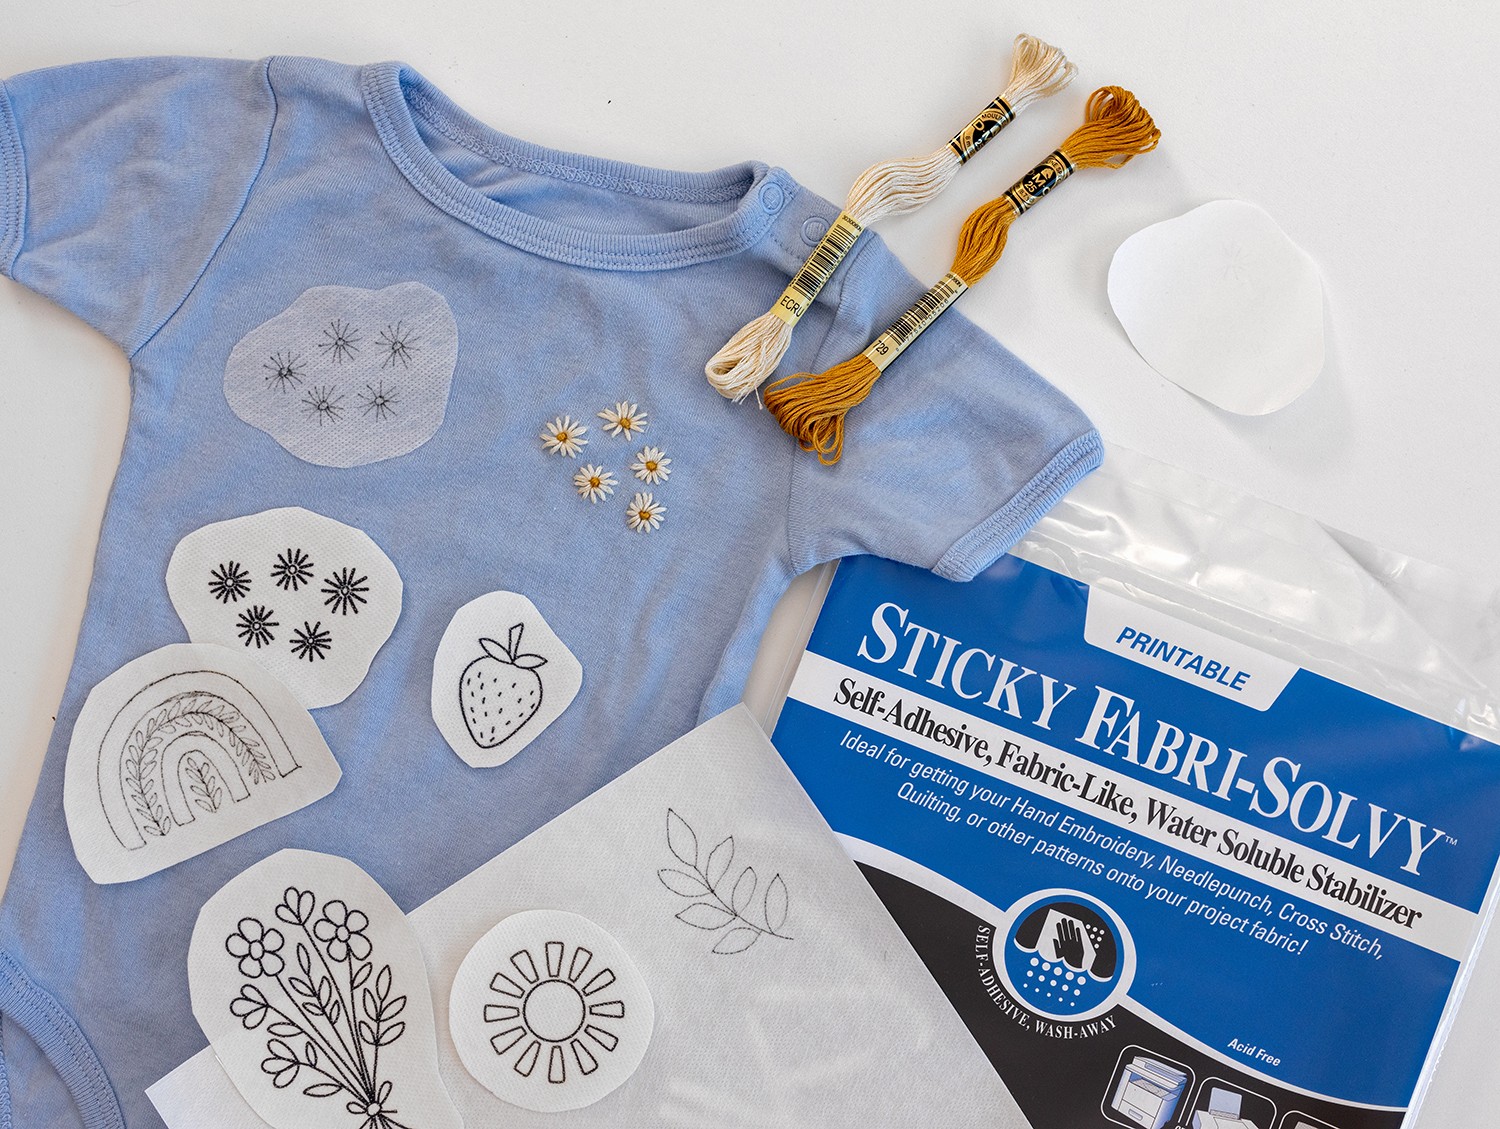 Patches of Sticky Fabri-Solvy with drawn designs lie on a T-shirt.